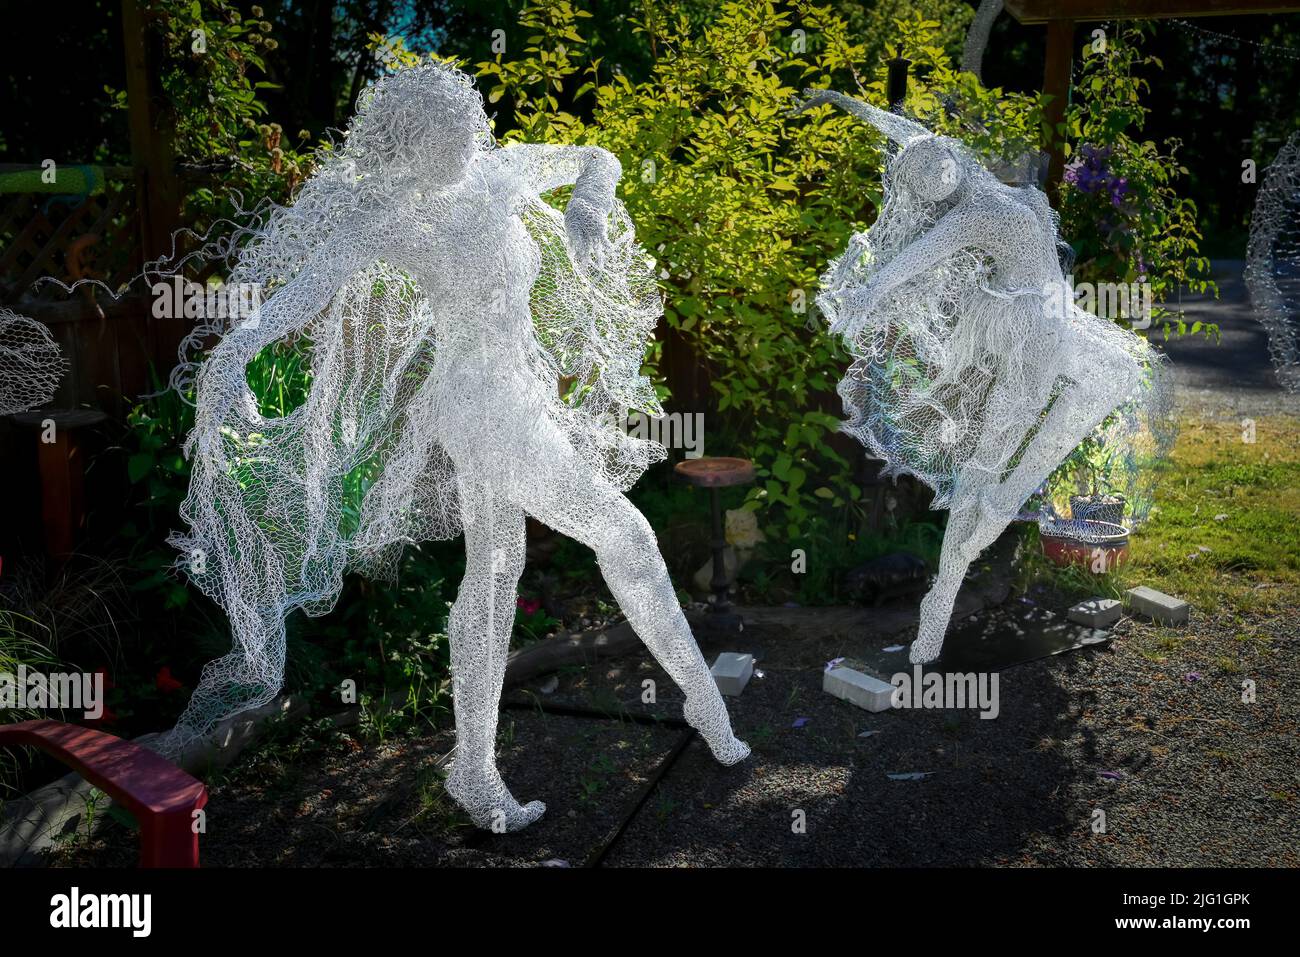 Fanciful chicken wire dancers. Sculpture by Sheena McCorquodale, CatHouse Gallery, Qualicum Beach, British Columbia, Canada Stock Photo